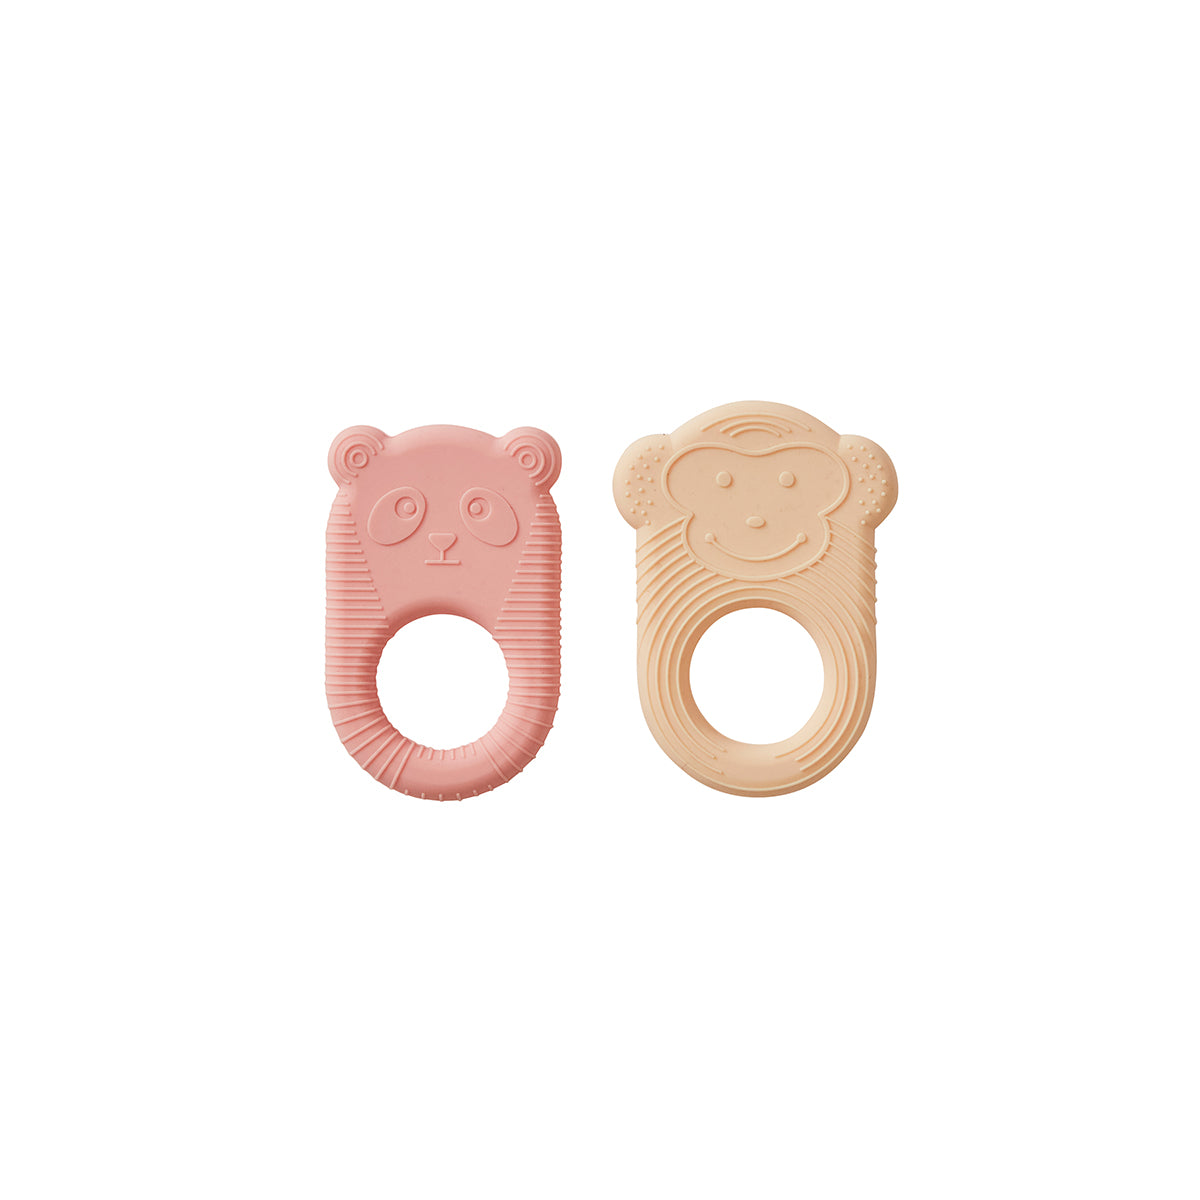 OYOY MINI Nelson & Ling Ling Baby Teether - Pack of 2 Teether 805 Vanilla / Coral